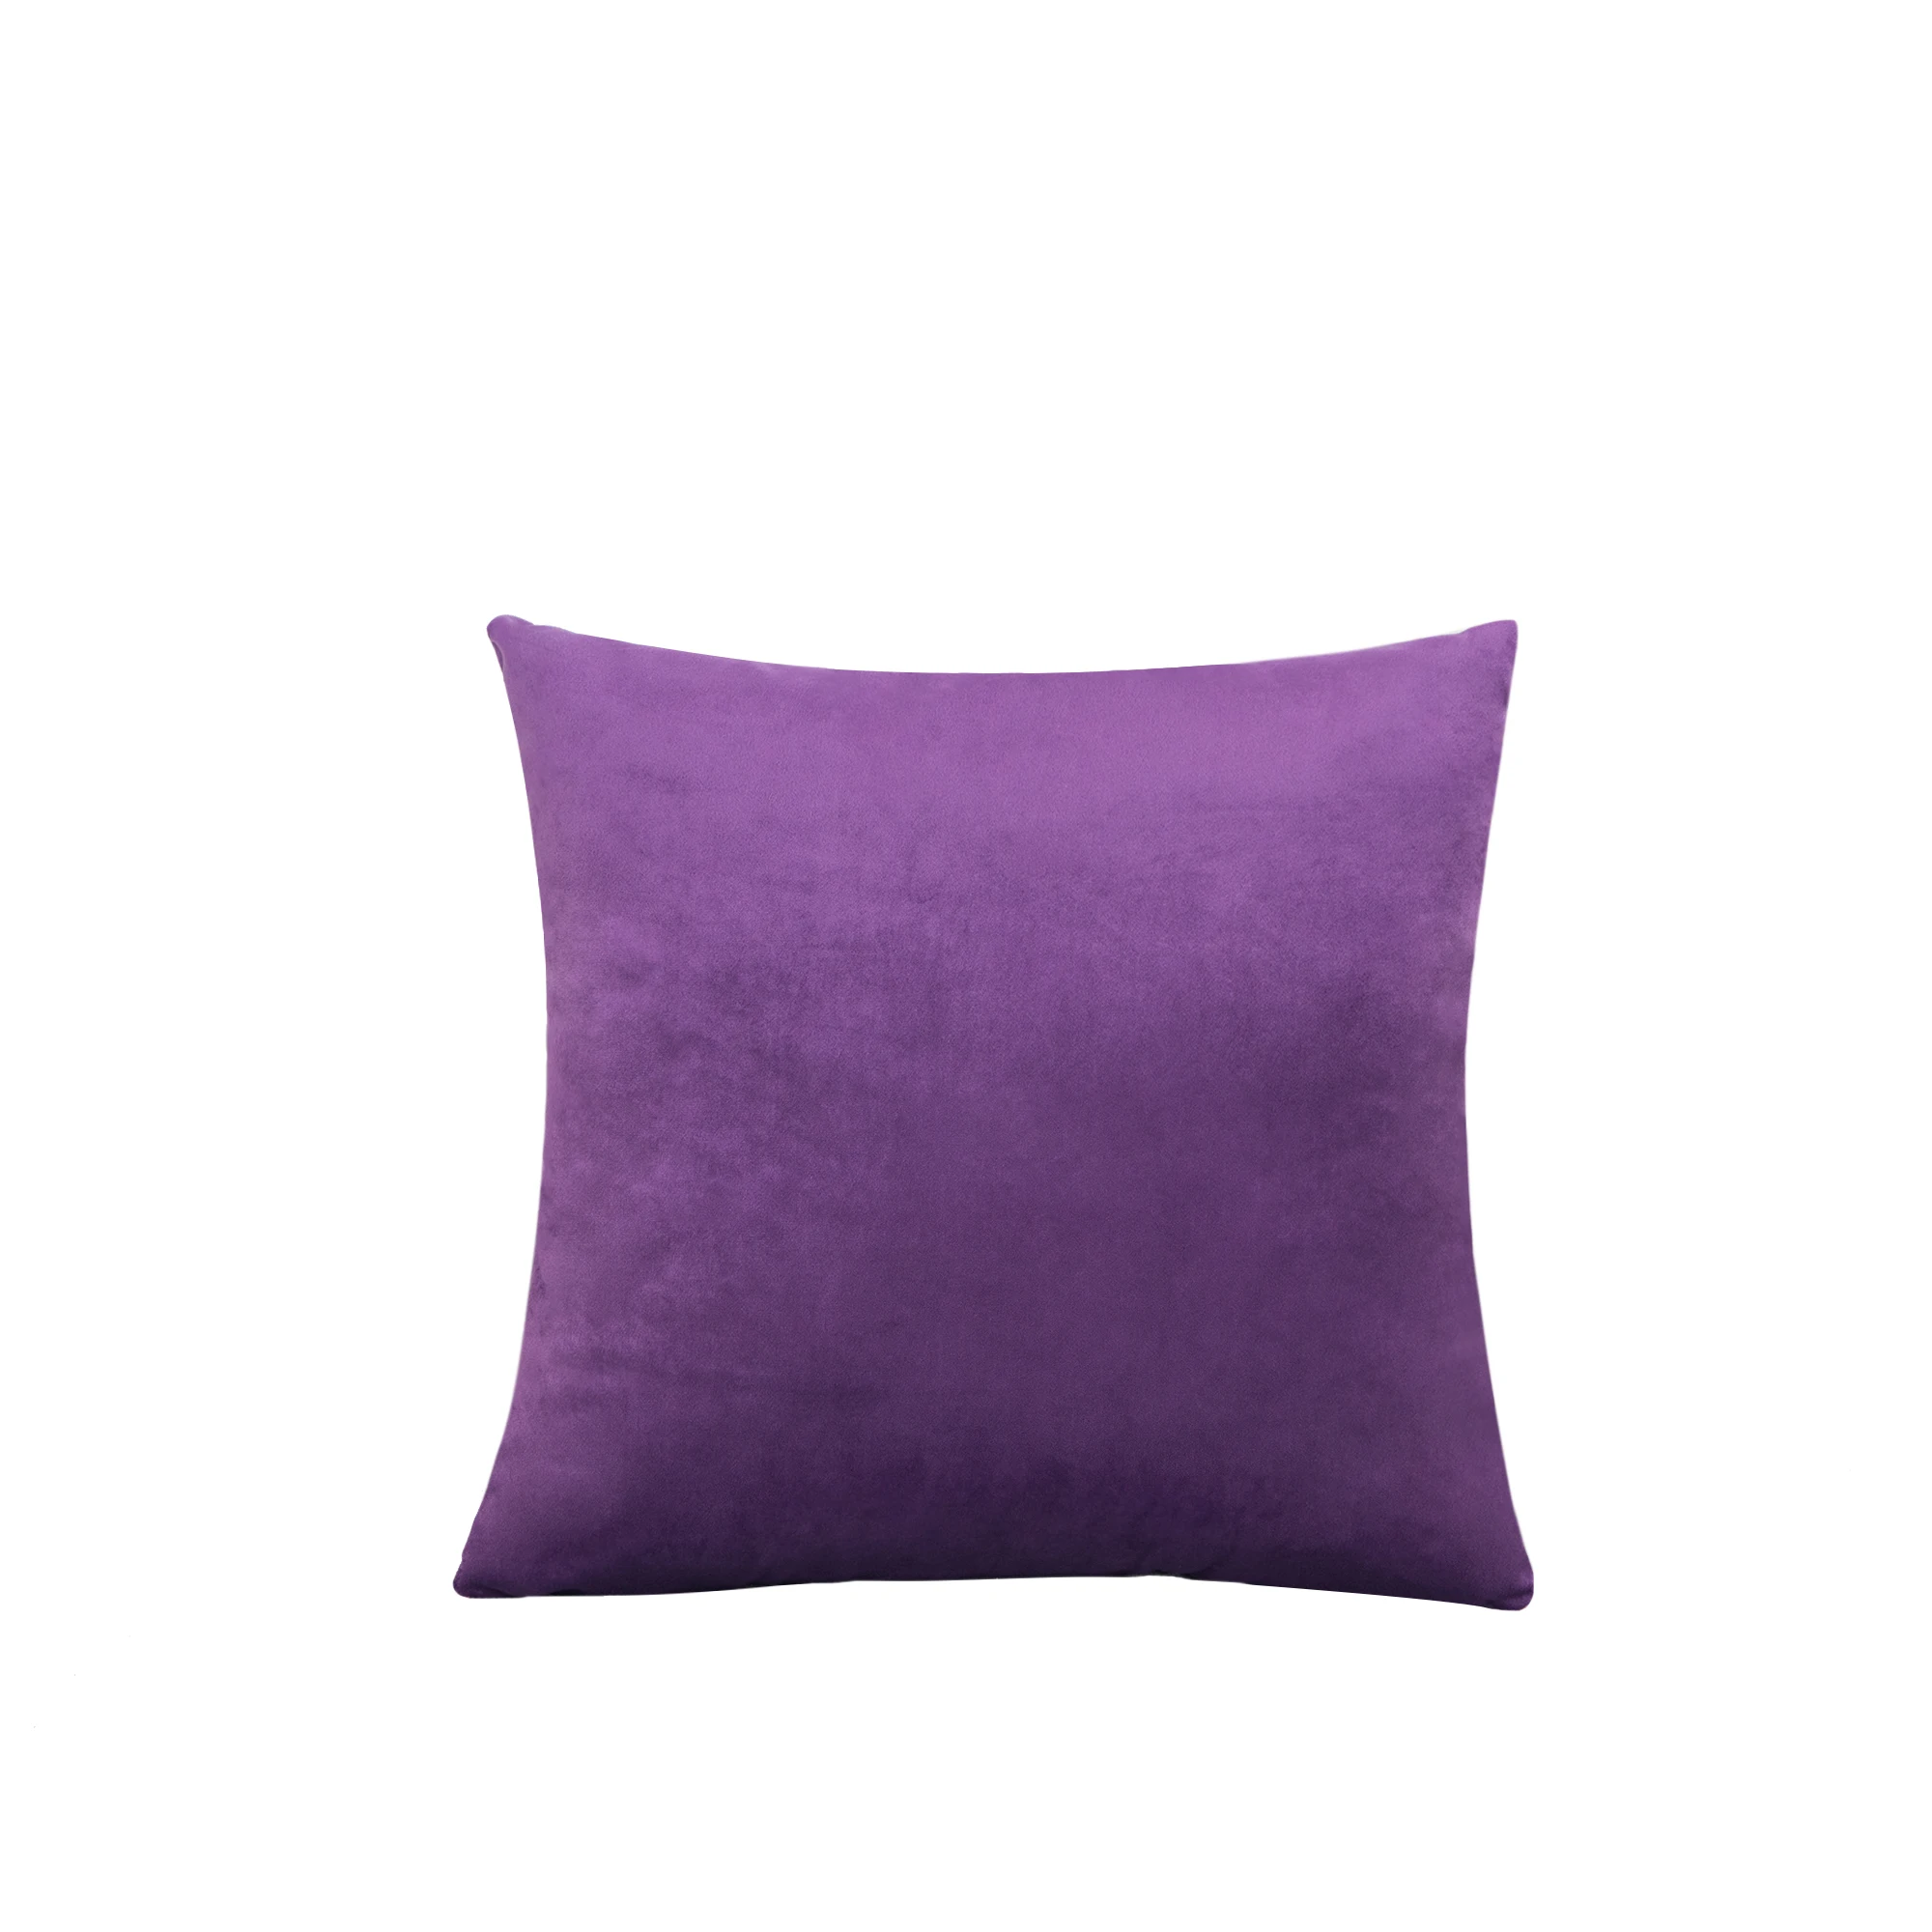 J Solid Color Velvet Cushion Cover Candy Color Throw Pillow Case For Sofa Car Home Decorative Pillowcase Pillow Cover Decoration